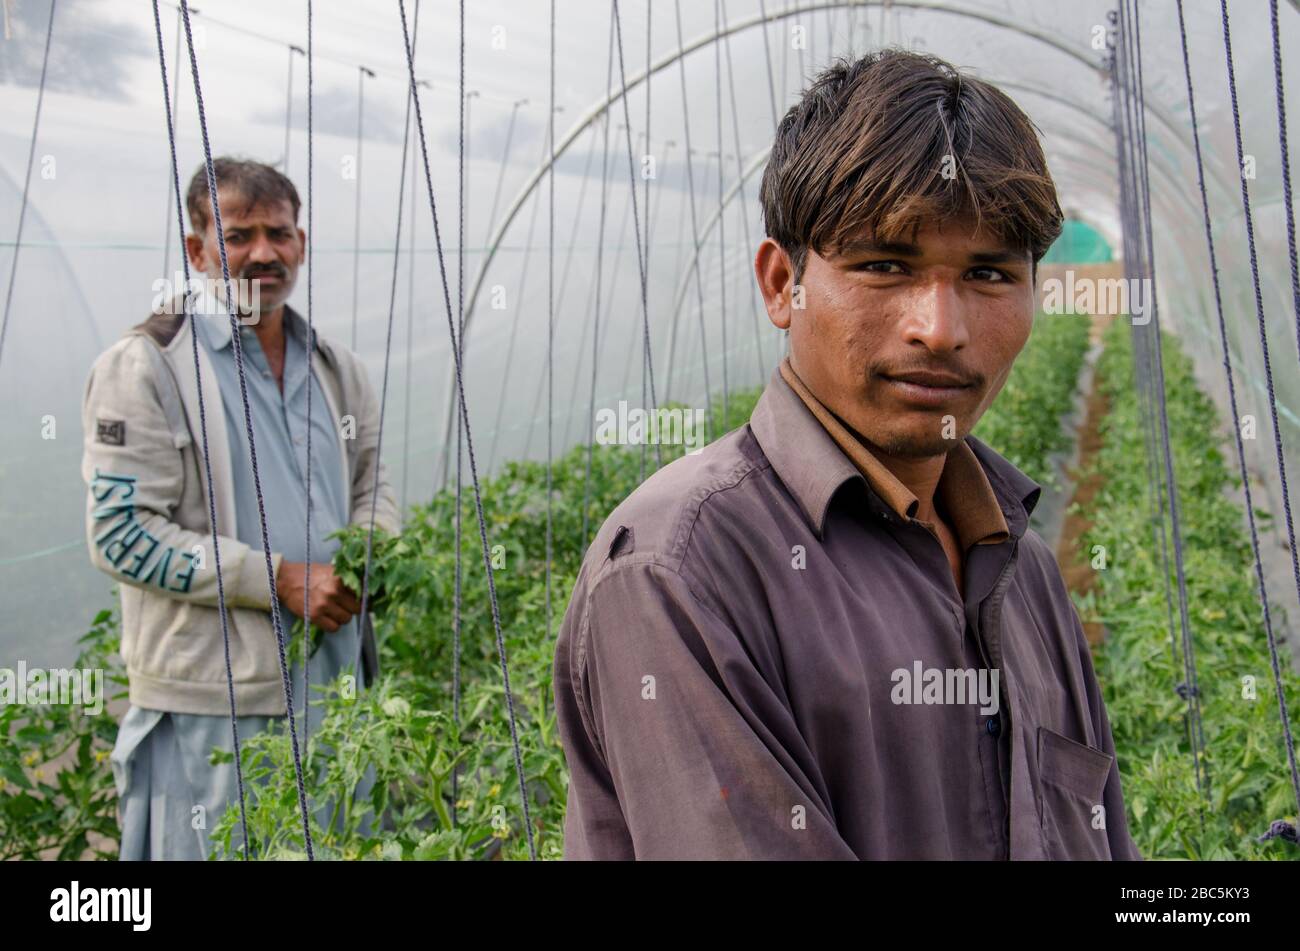 Ram Chand and Ibrahim tend to the Cocumber plants in Agriomic agri farm in Balkasar Punjab, Pakistan. Stock Photo